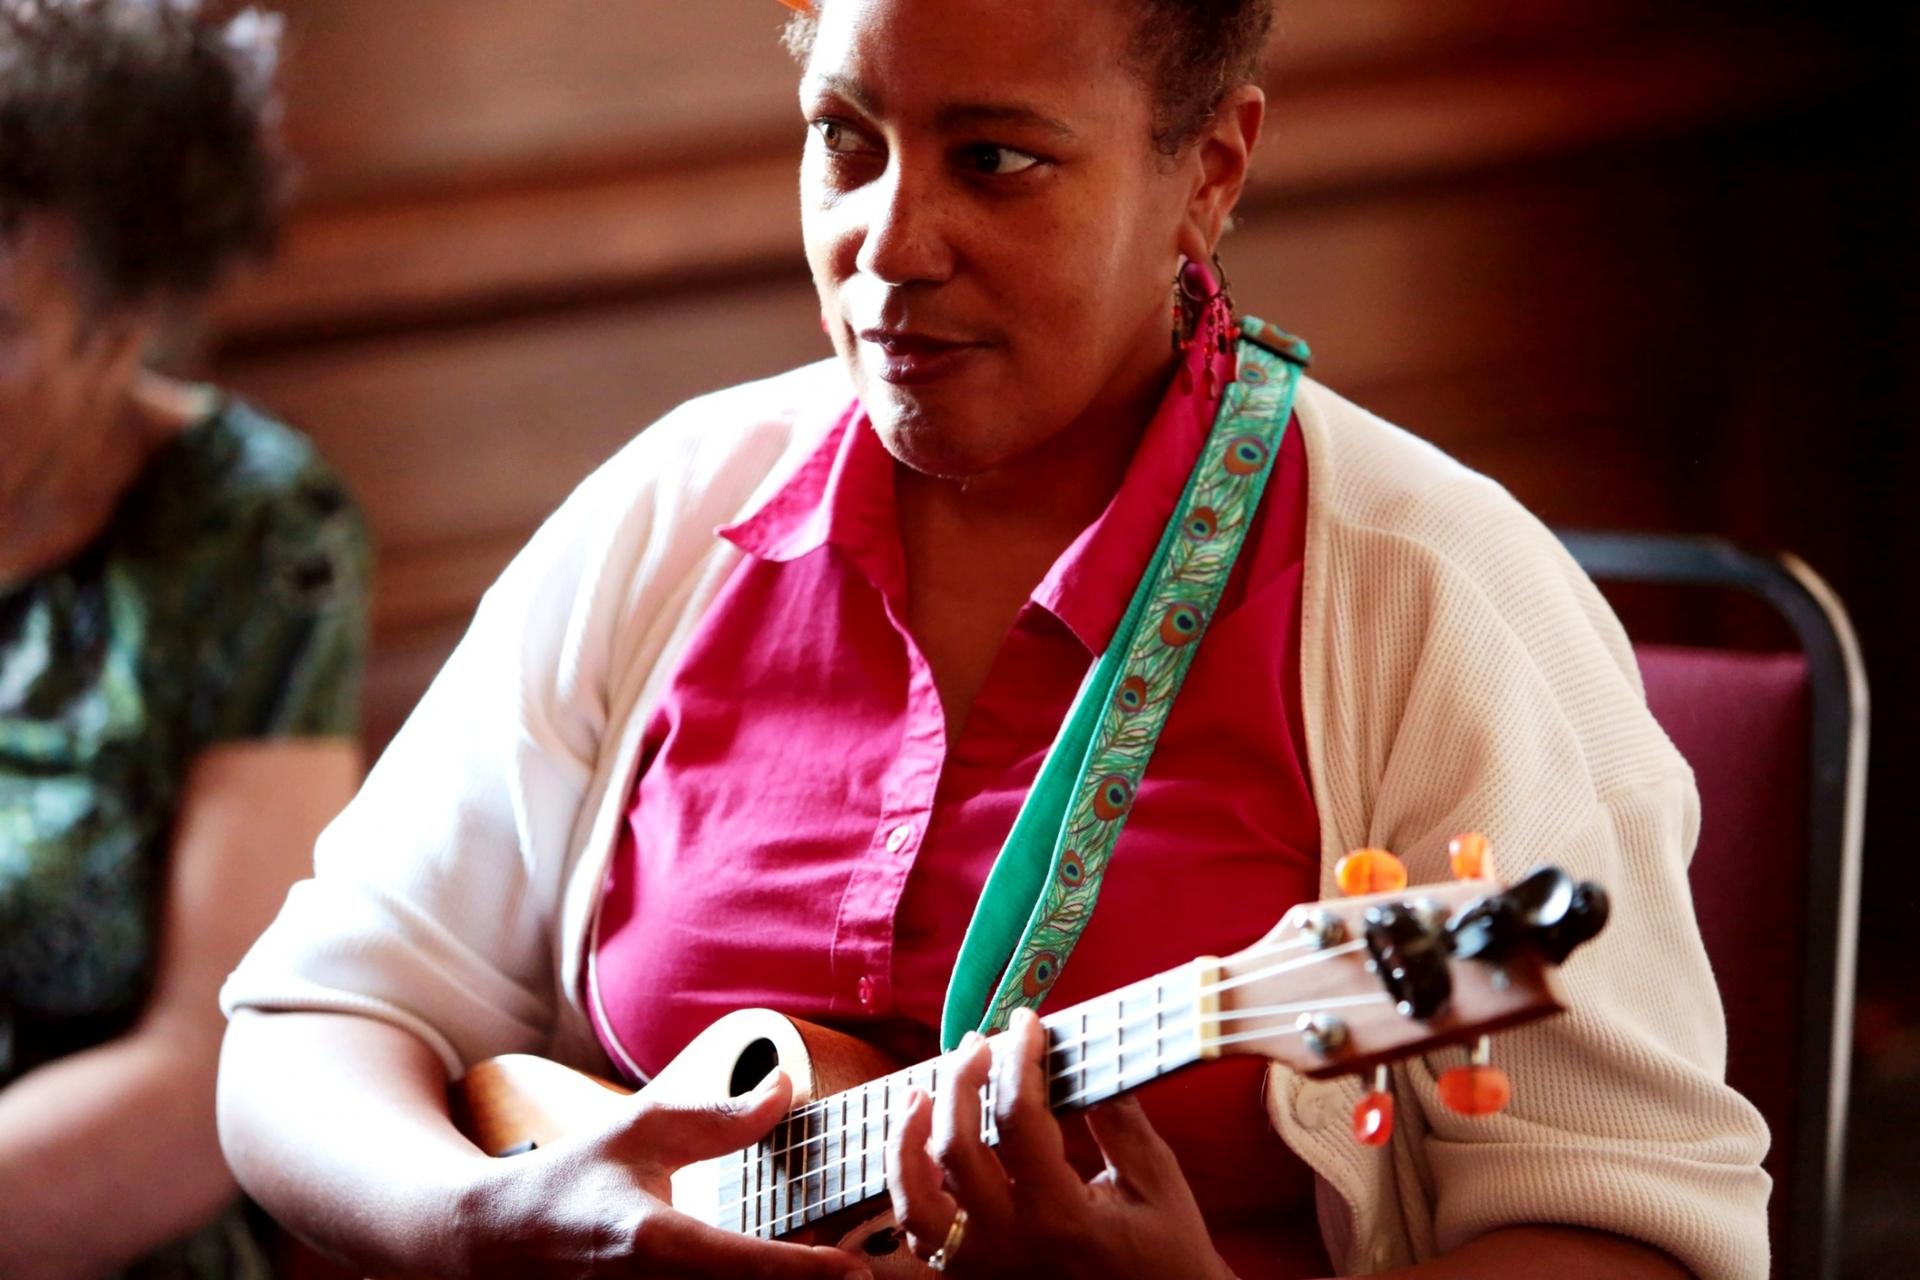 Maryland ukulele player Lori Perine, who has been attending UkeFest for about 8 years. 